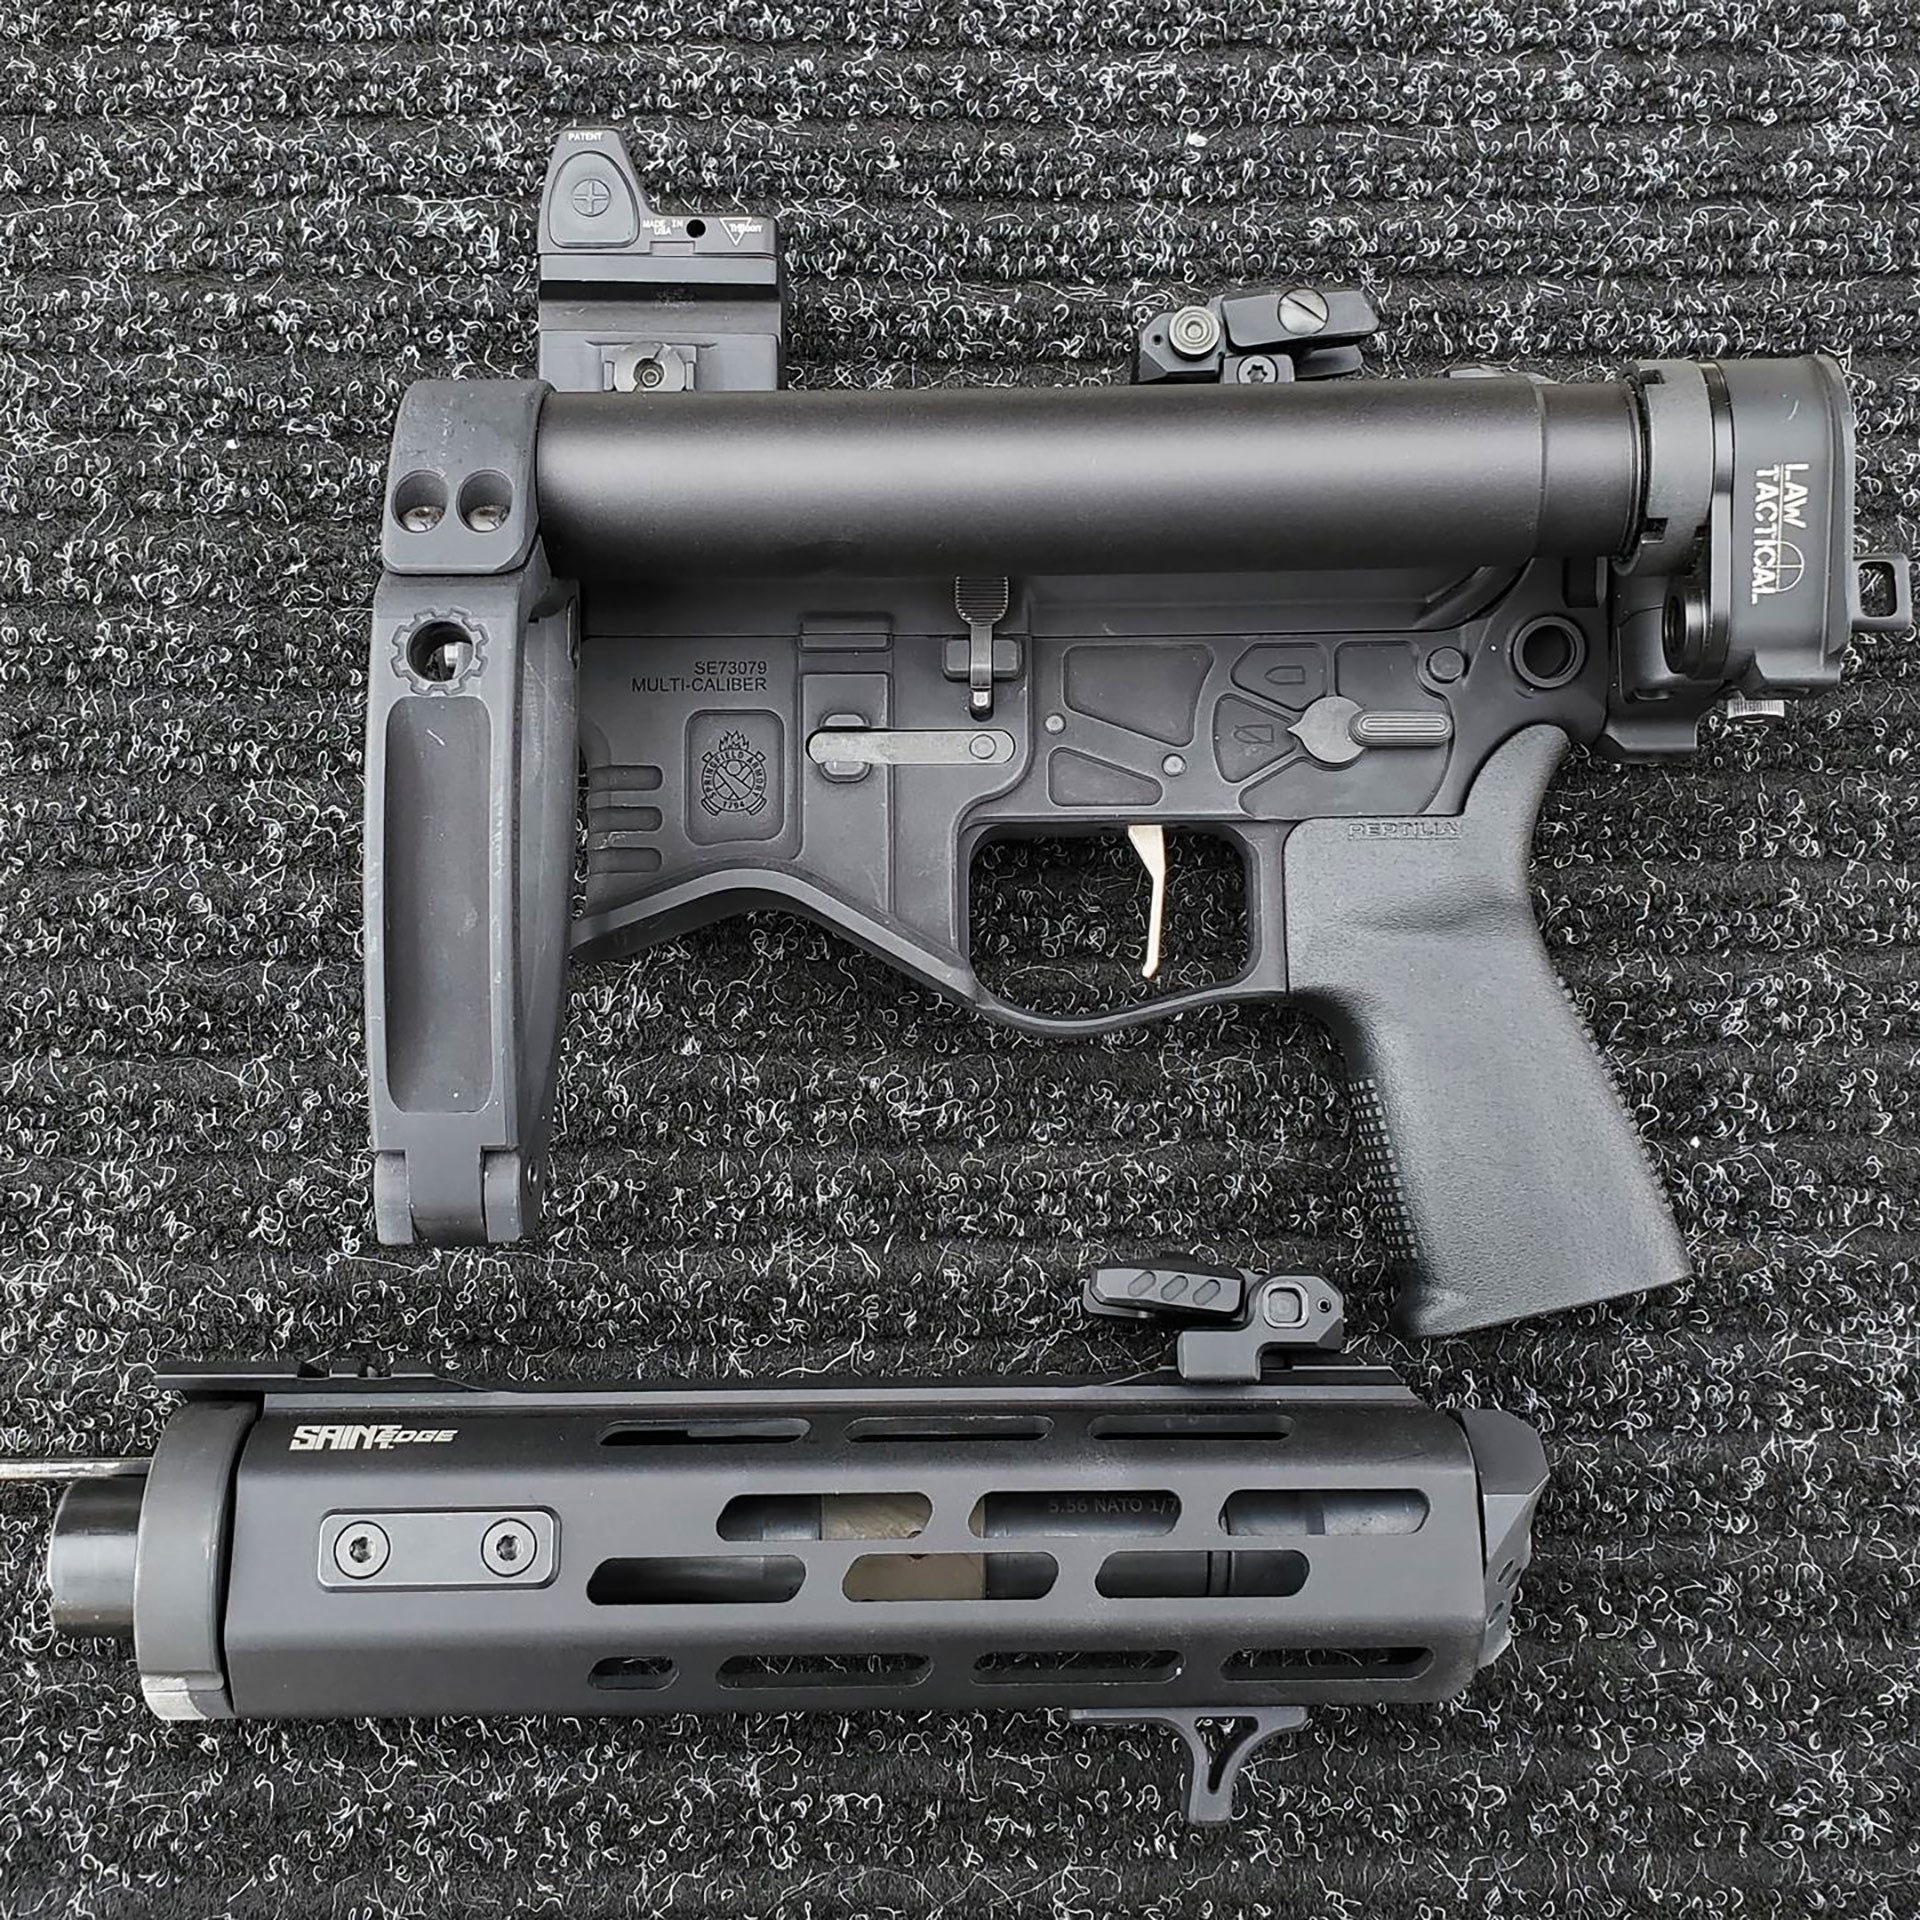 Springfield Armory introduced its takedown EVAC model at the 2020 SHOT Show.